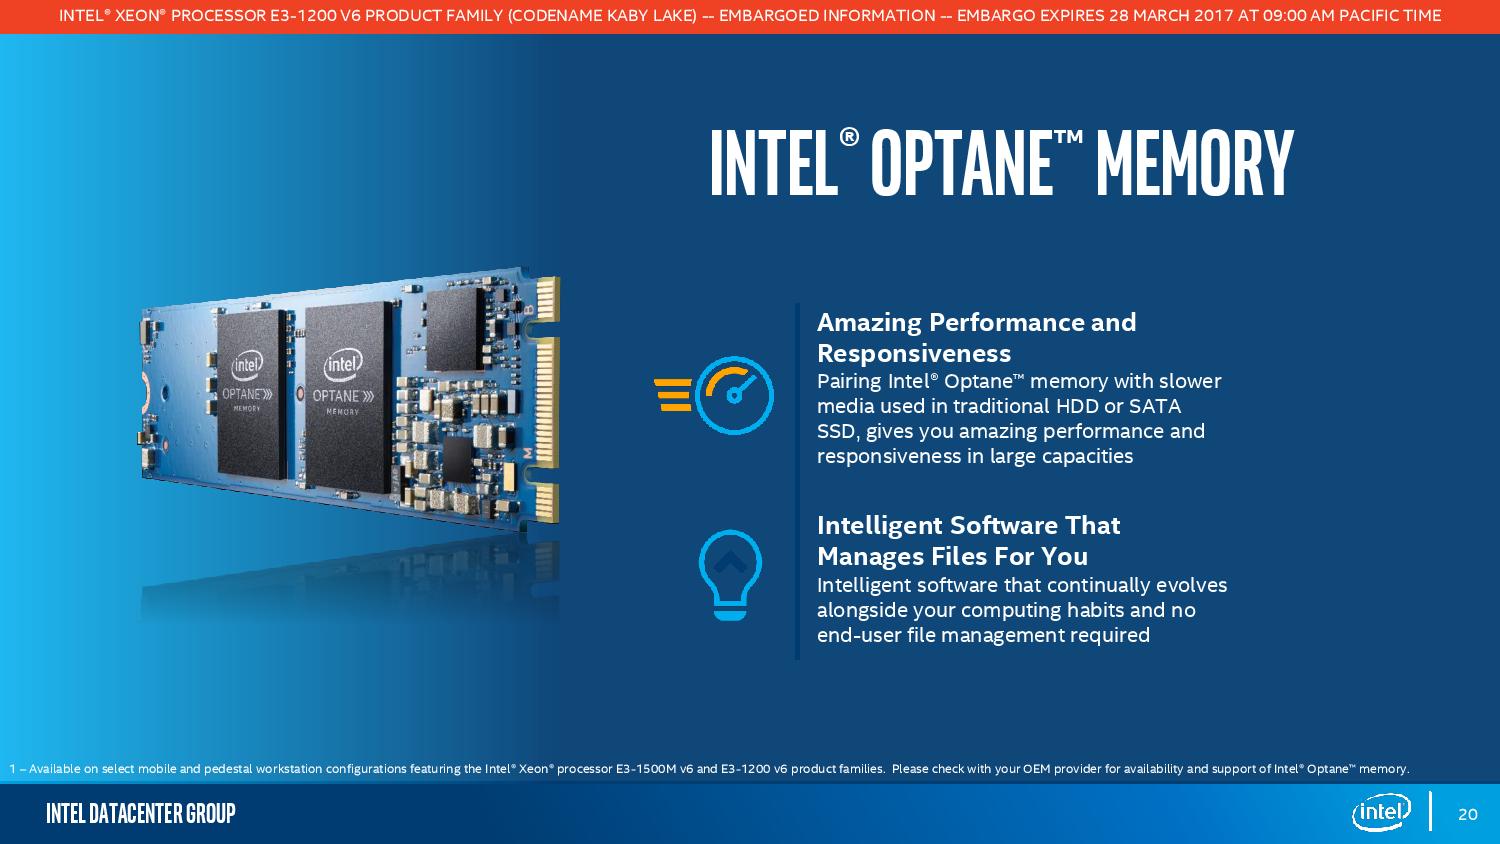 Intel Launches Kaby-Lake based Xeons: The E3-1200 v6 Family